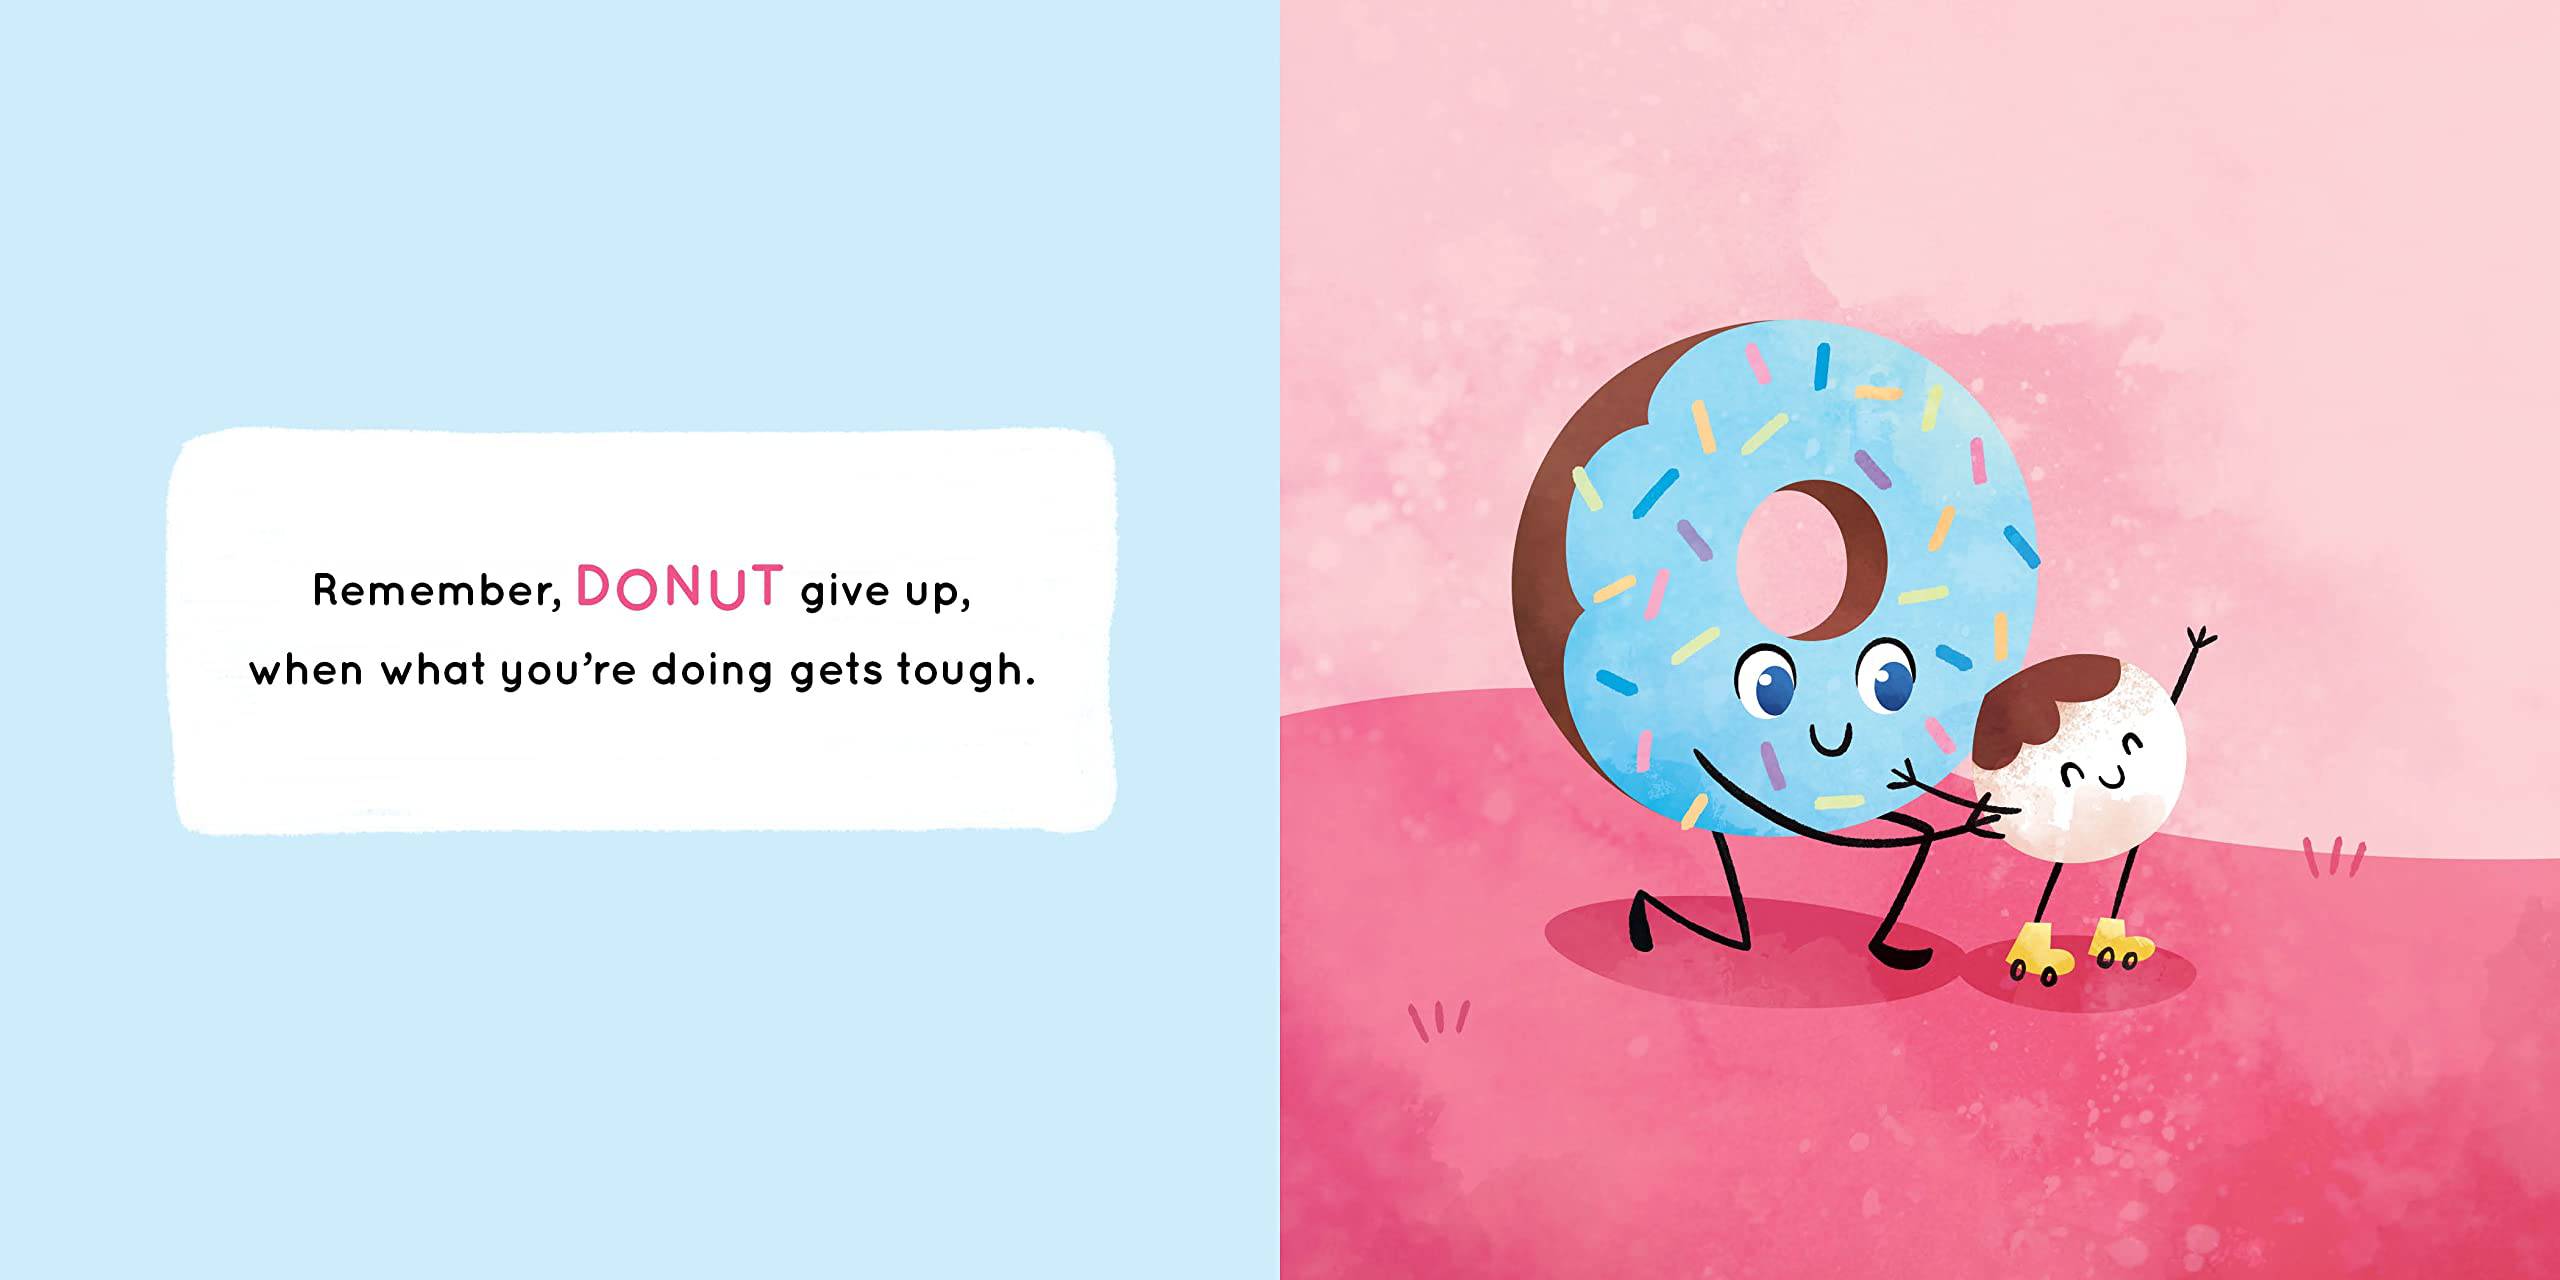 Donut Give Up: A Cute and Funny Affirmations Board Book - Twinkle Twinkle Little One